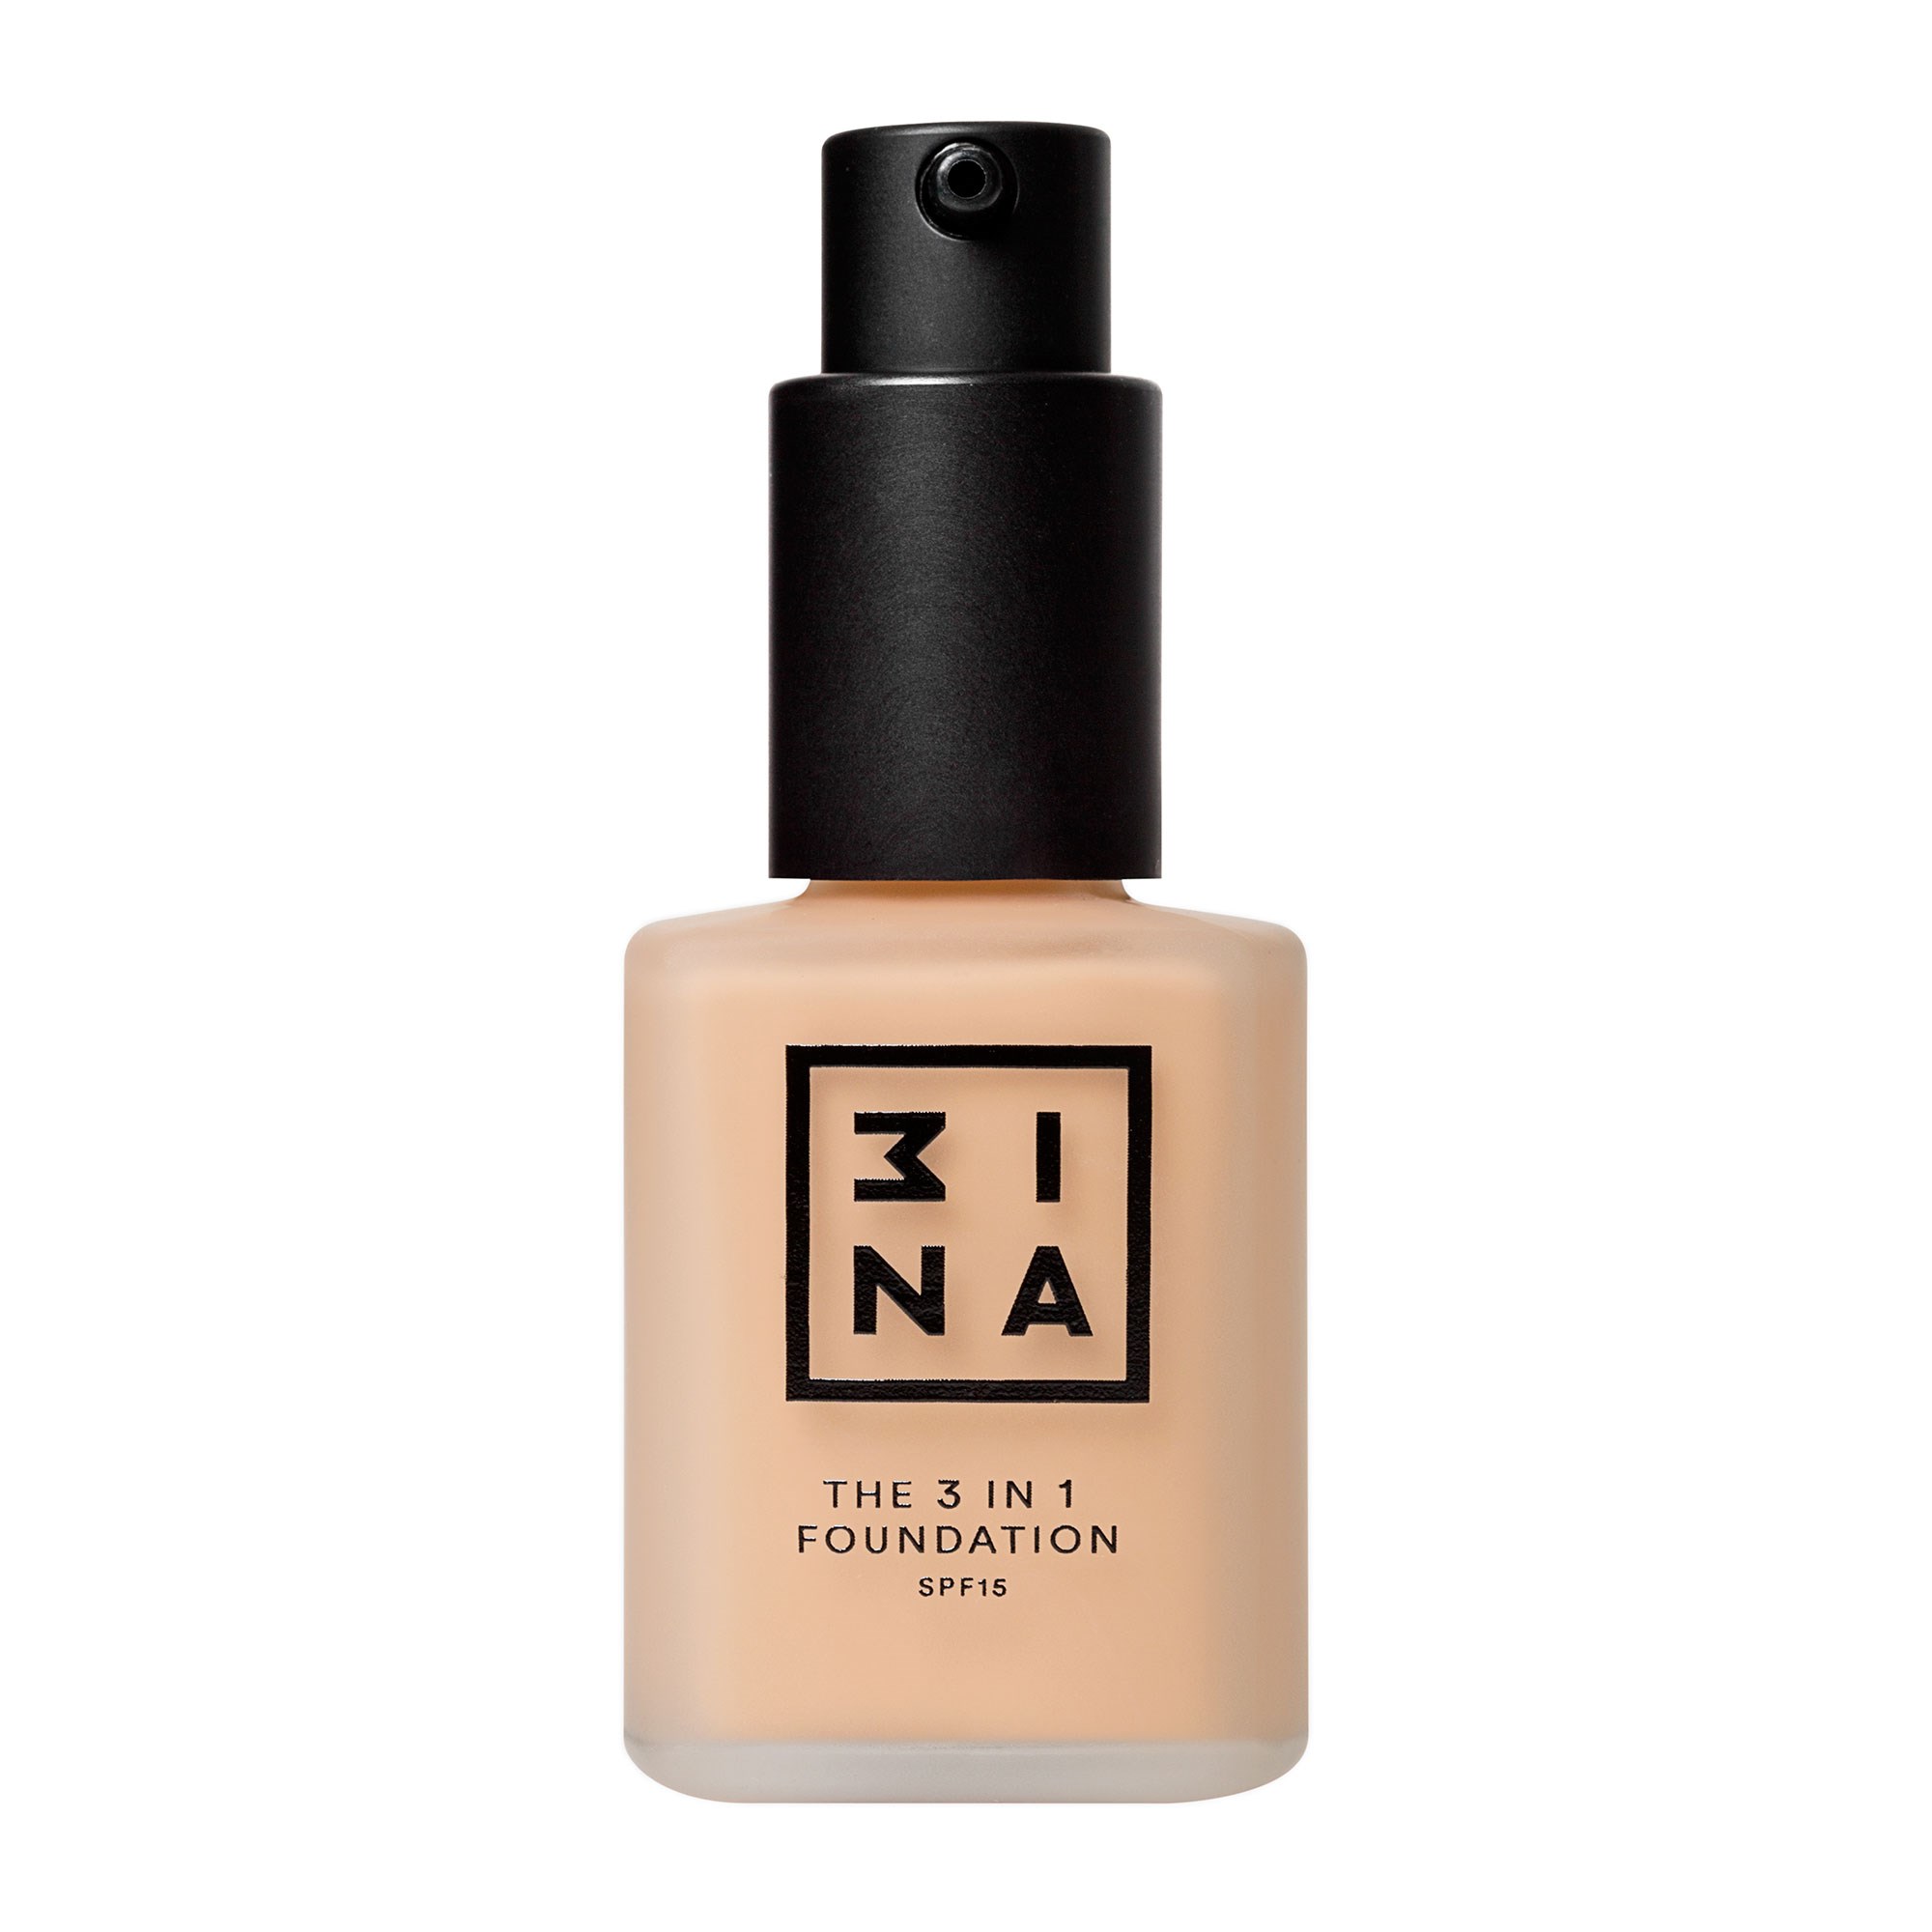 3INA The 3 in 1 Foundation